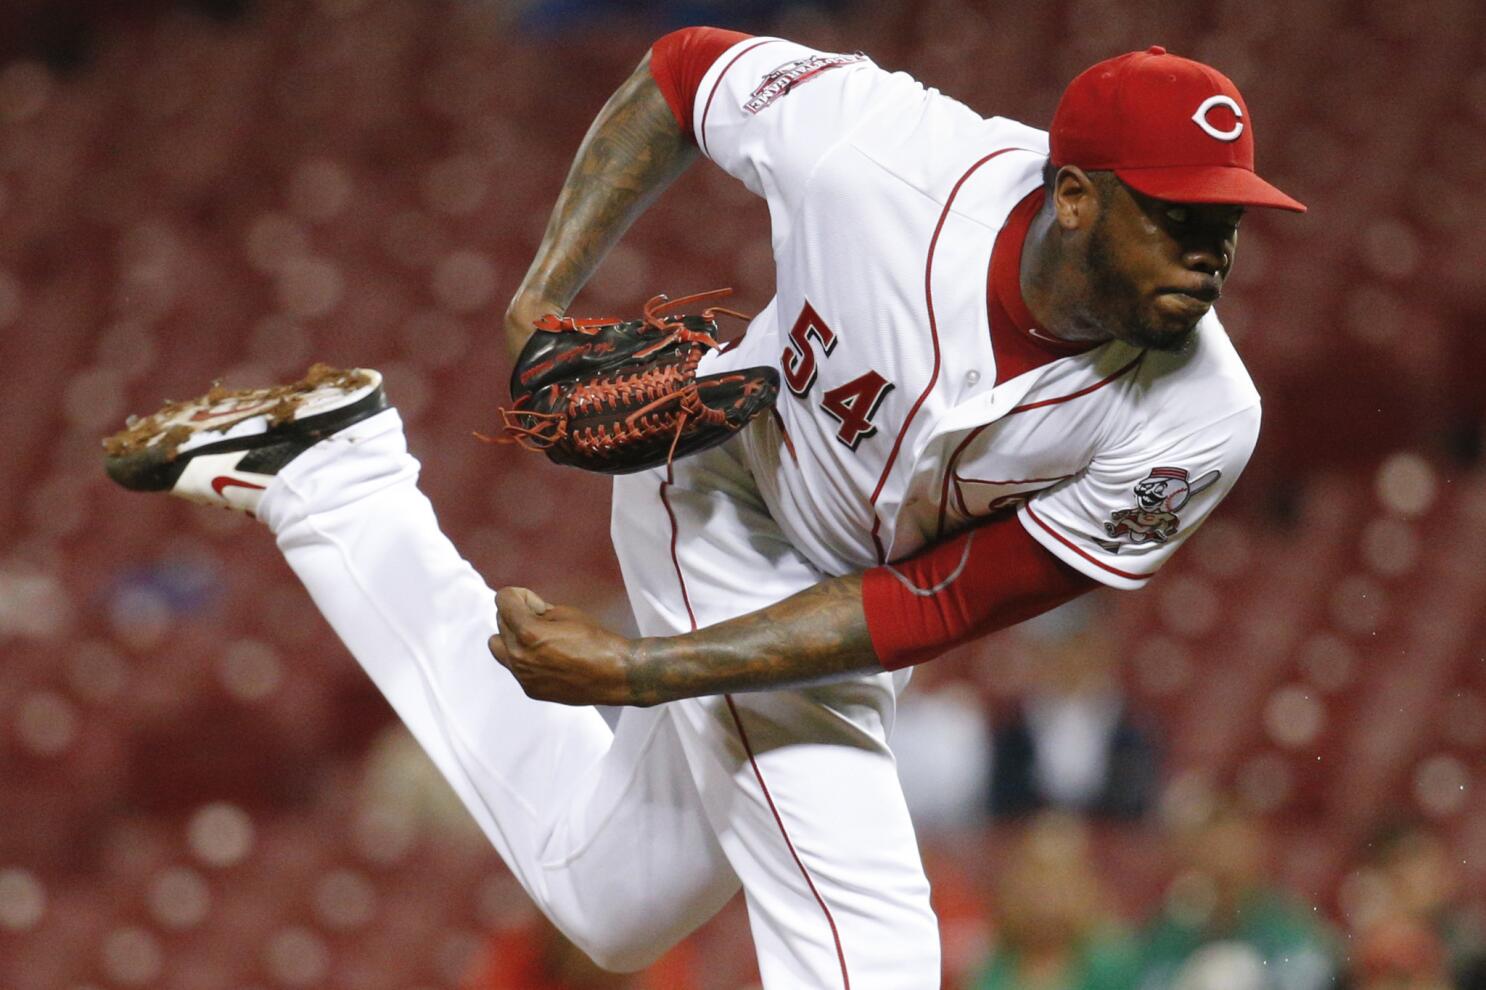 Yankees Pitcher Aroldis Chapman Suspended 30 Games for Allegedly